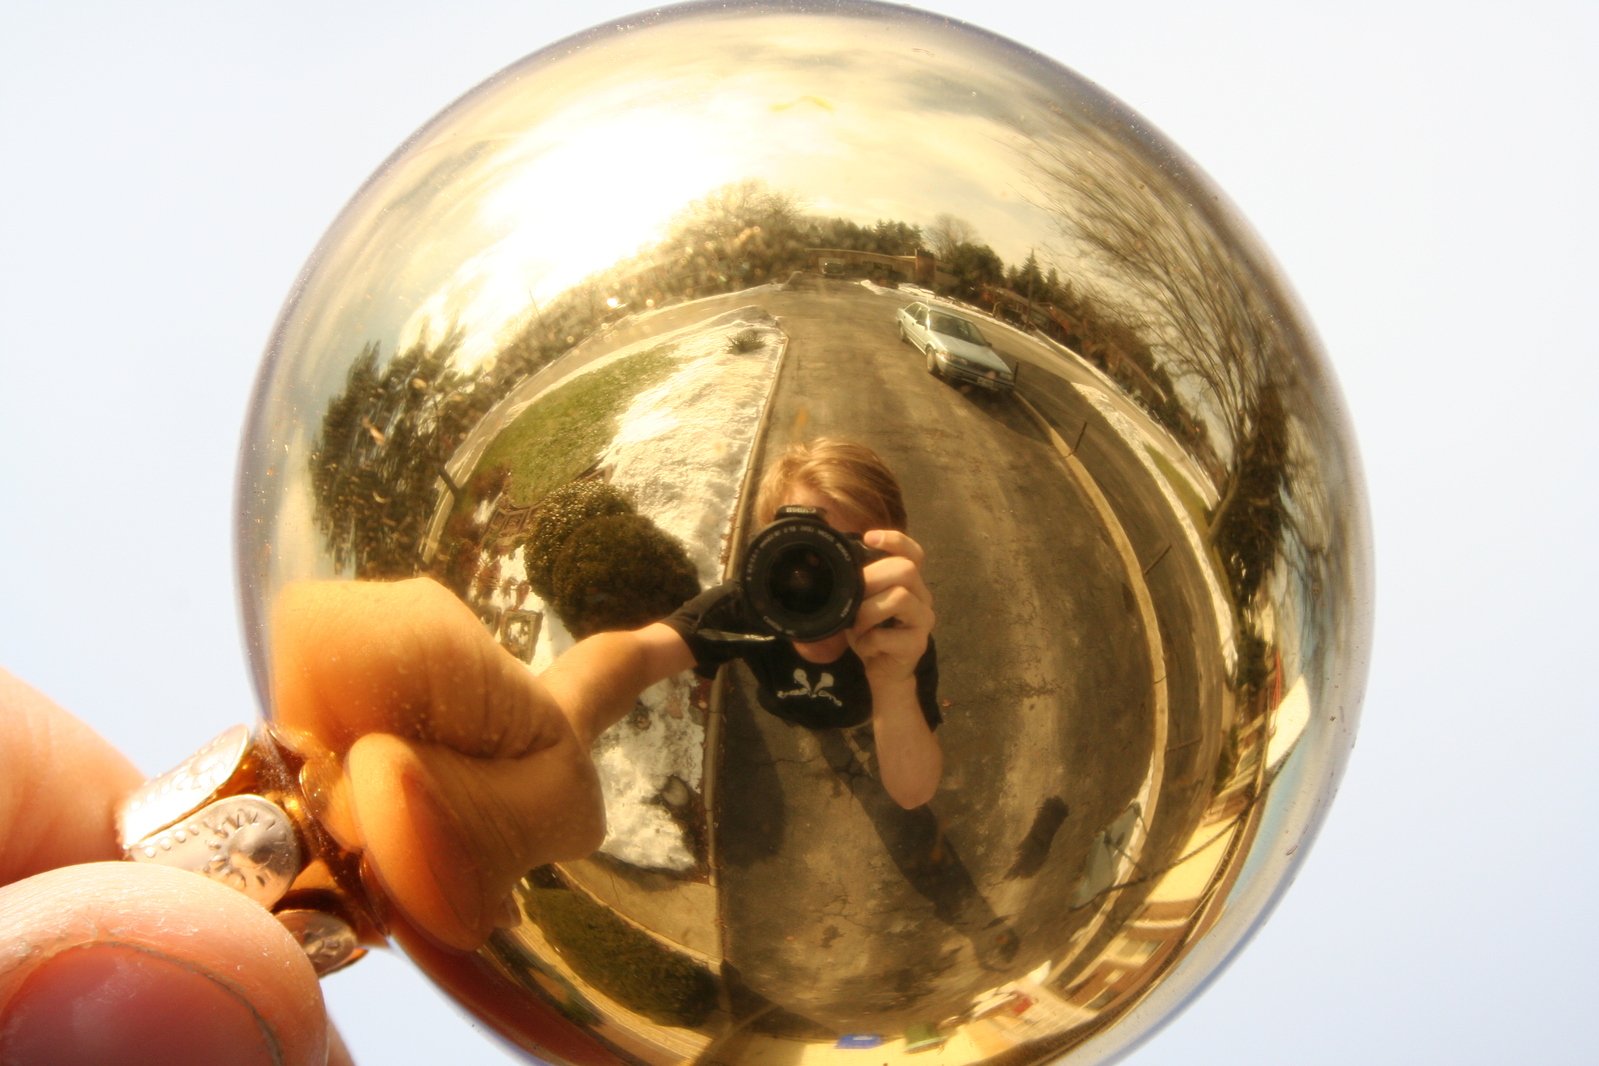 person taking picture through large mirror ball with camera